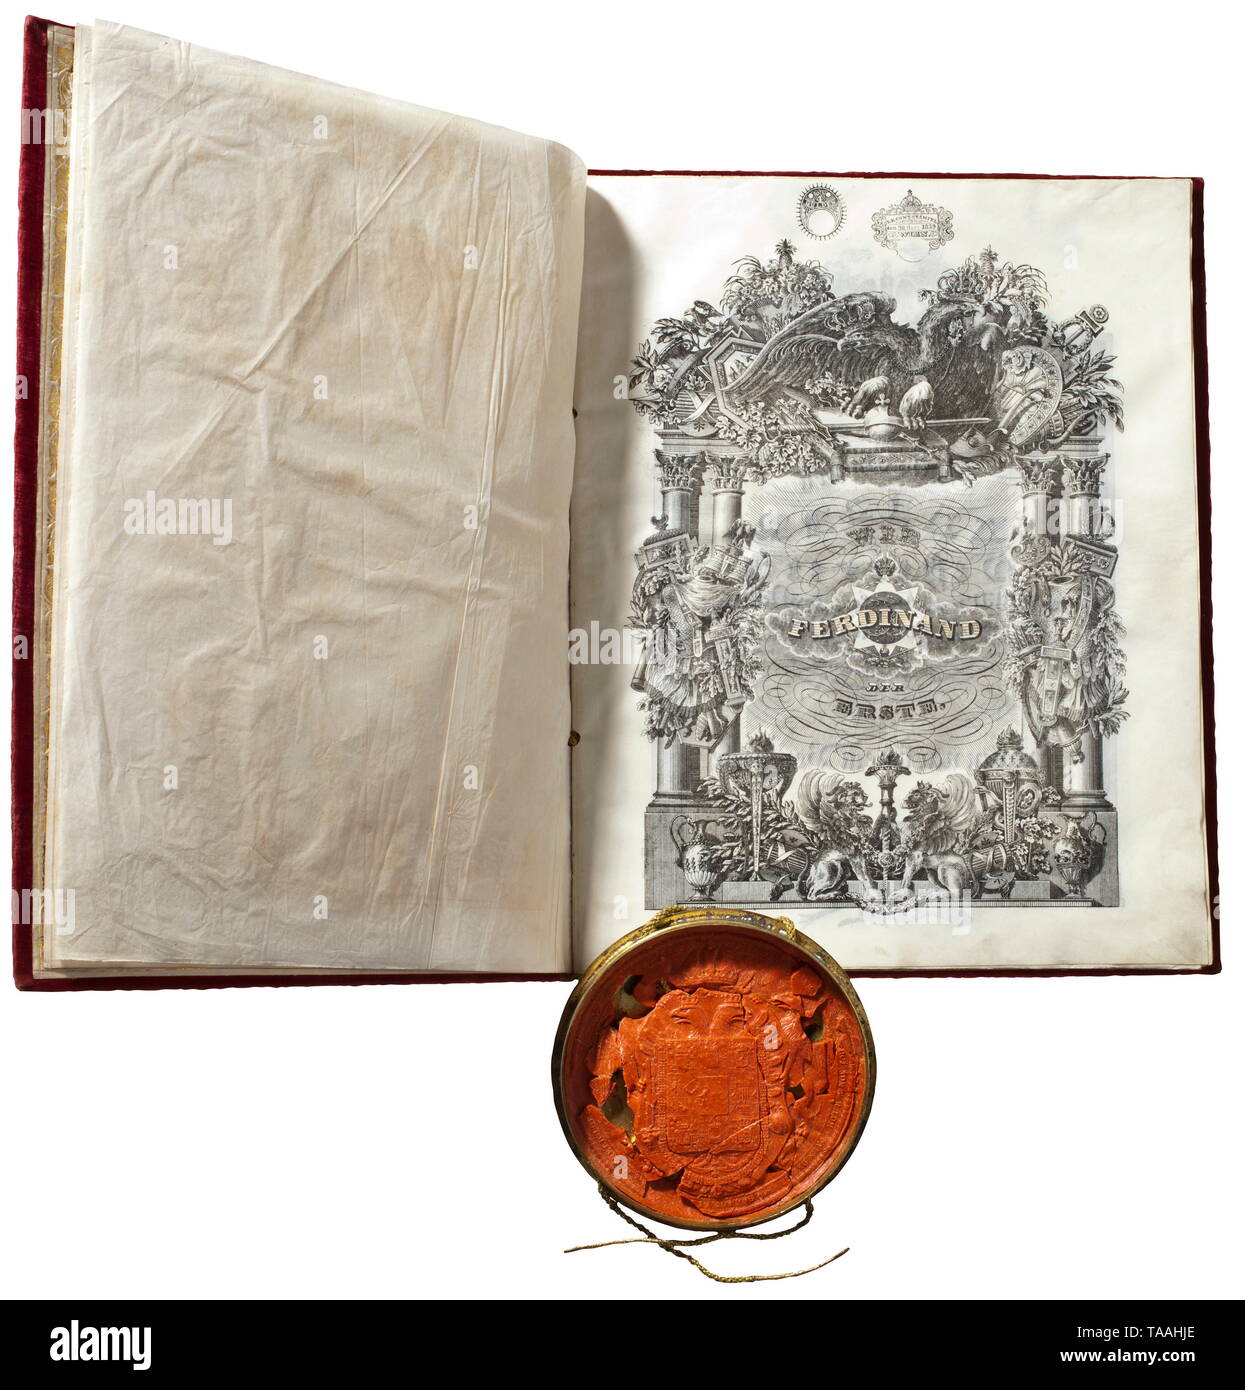 Emperor Ferdinand I (1793 - 1875) - a patent of nobility 'von Montpredil', dated 16 February 1839 Six elaborately fashioned sheets inscribed on both sides, with gold decoration, depicting the hand-painted aristocratic coat of arms. Bestowed upon Ignaz Rauch, major of the imperial bombardier corps, soldier since 1796, decorated in numerous campaigns and battles, in particular as a heroic combatant in the battle of Malborgeth in 1809, for which he received the bravery award in gold, and later in Paunsdorf, Leipzig, Hochheim and others. In 1812 he w, Additional-Rights-Clearance-Info-Not-Available Stock Photo